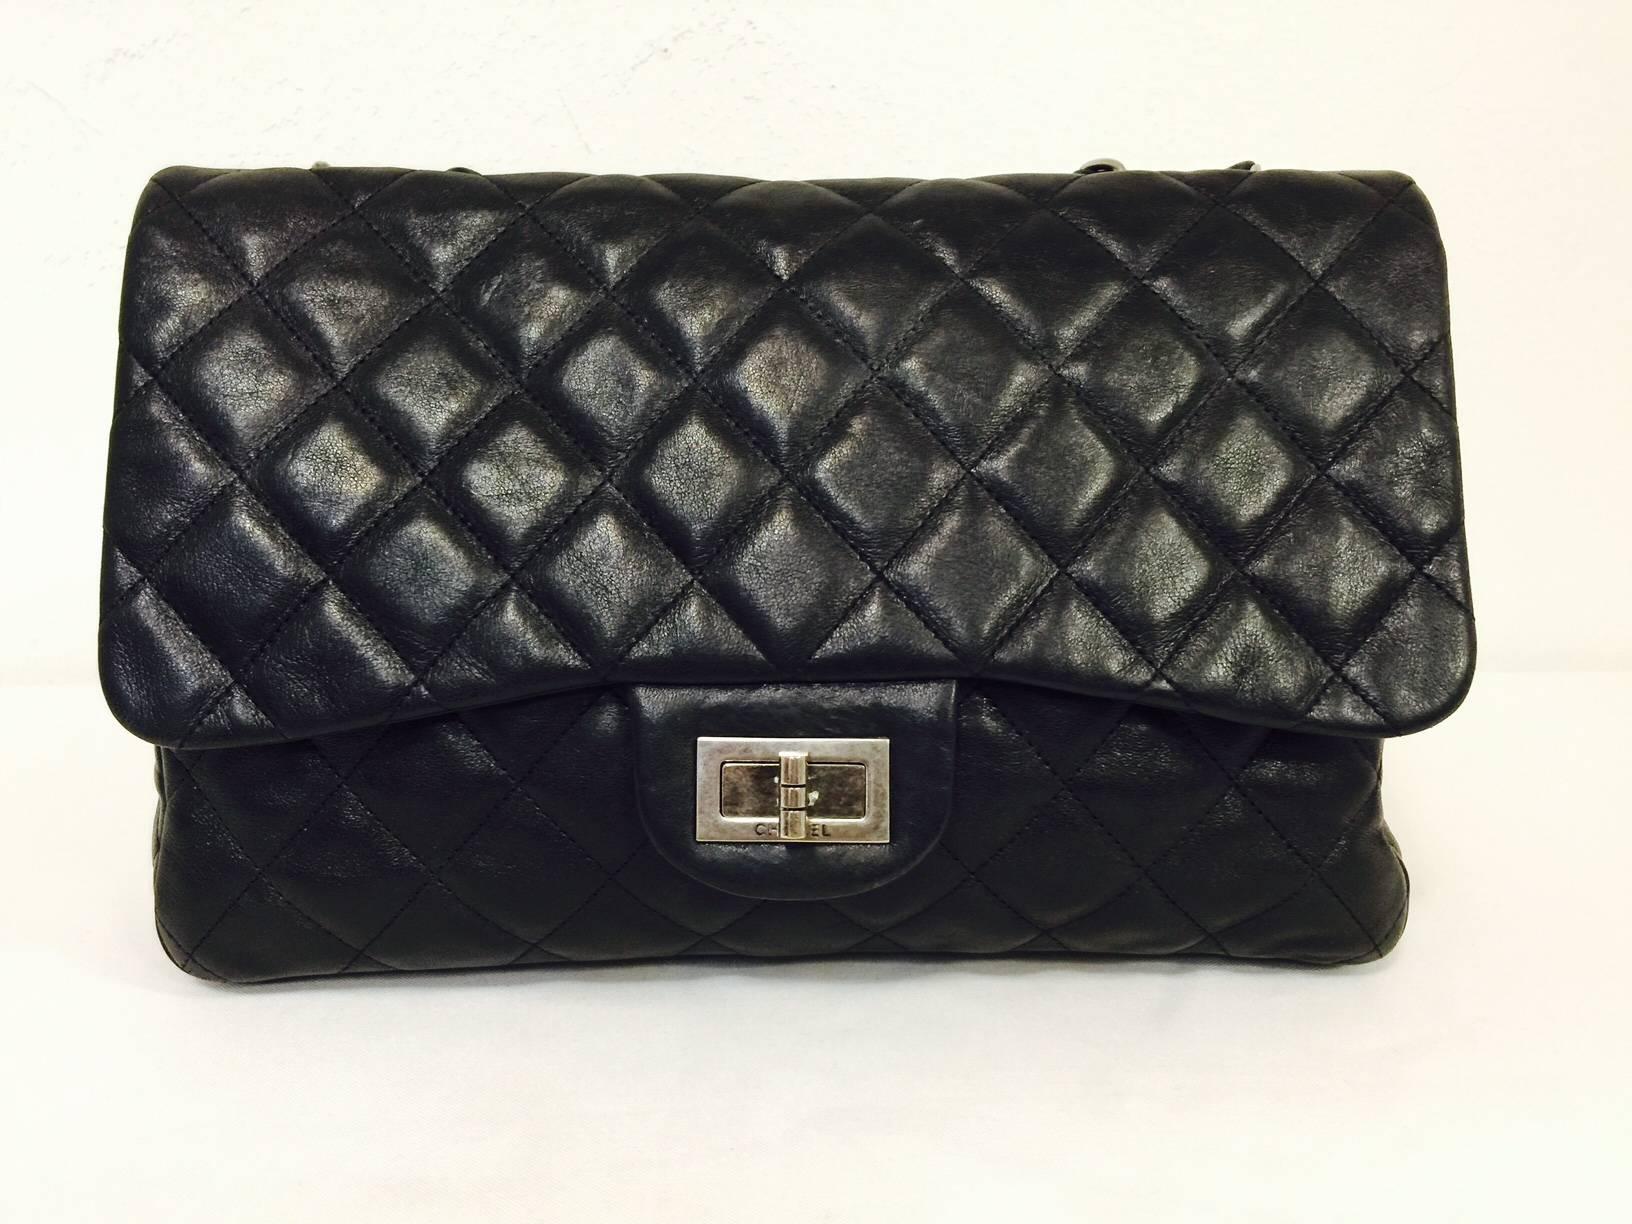 Chanel 2.55 Reissue Bag Size 226 in Black Quilted Lambskin is a highly coveted design by all devotees of Coco.  Inspired by the bag that Chanel herself introduced in February of 1955, this flap bag is next to the largest size made.  It's all